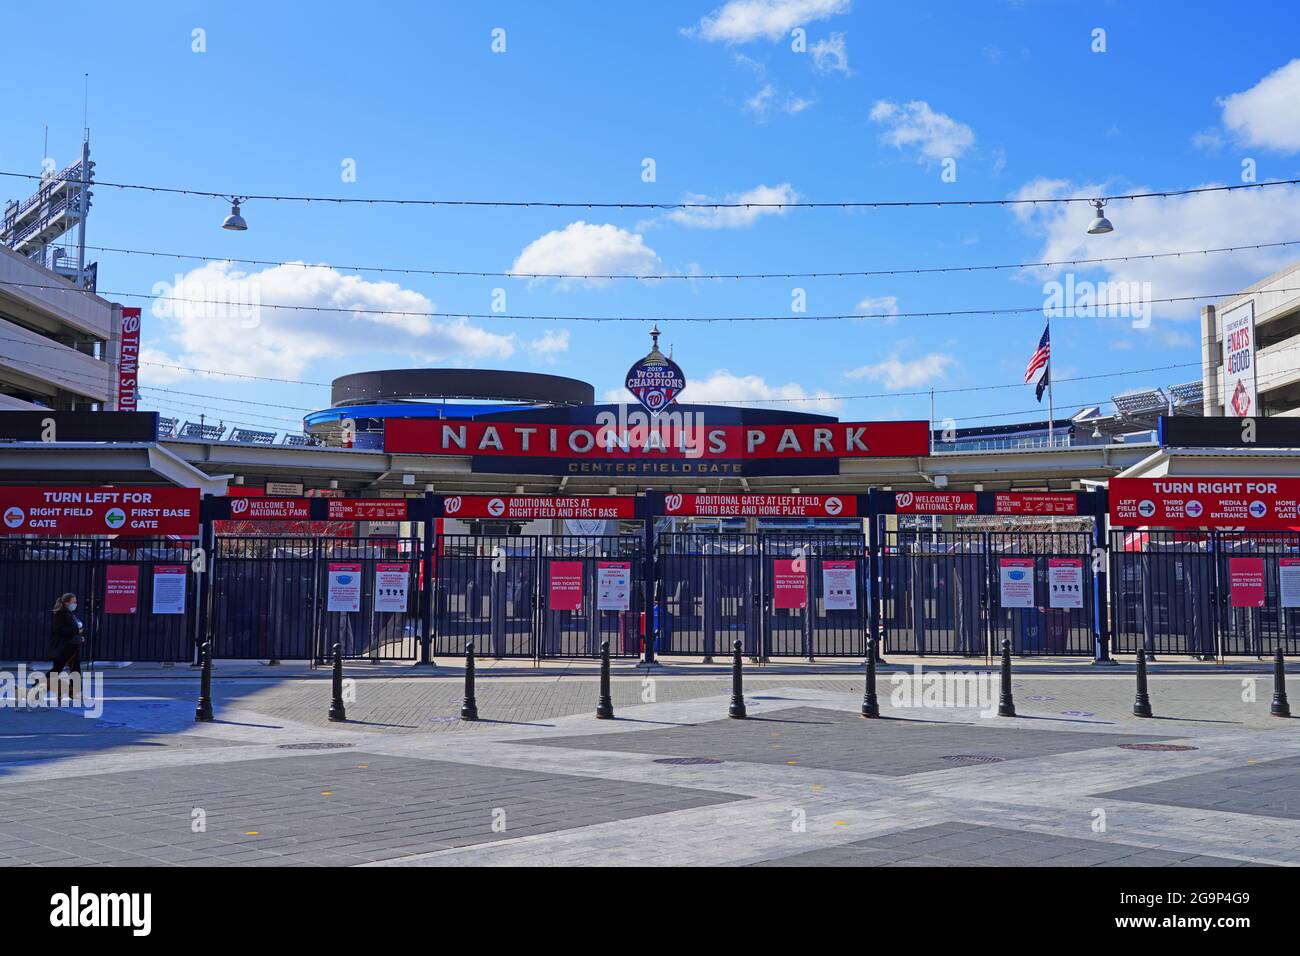 WASHINGTON, DC -2 APR 2021- View of the Nationals Park, a baseball park along the Anacostia River in the Navy Yard neighborhood of Washington, D.C. Stock Photo